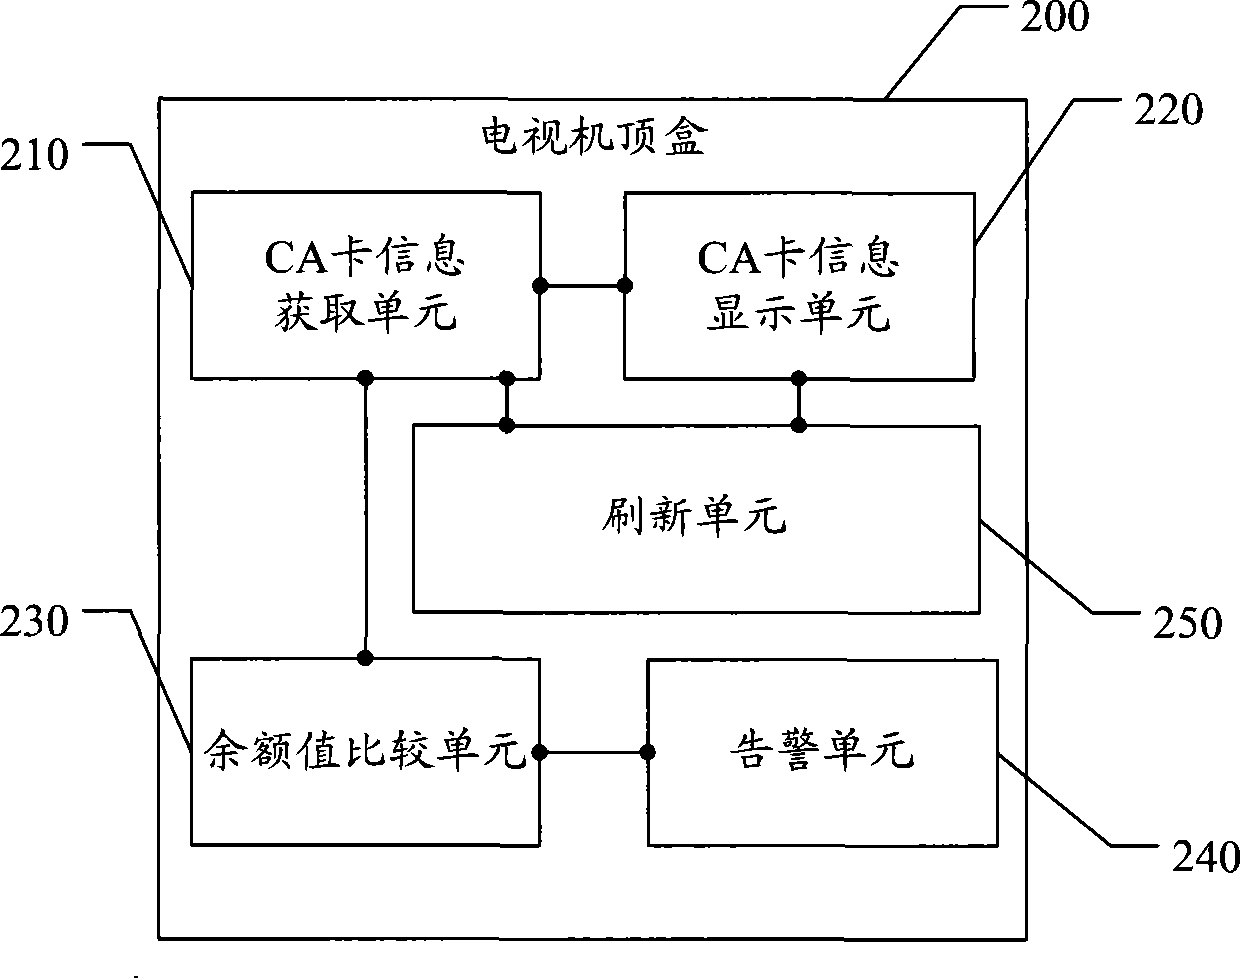 A TV STB and its method for displaying CA card state